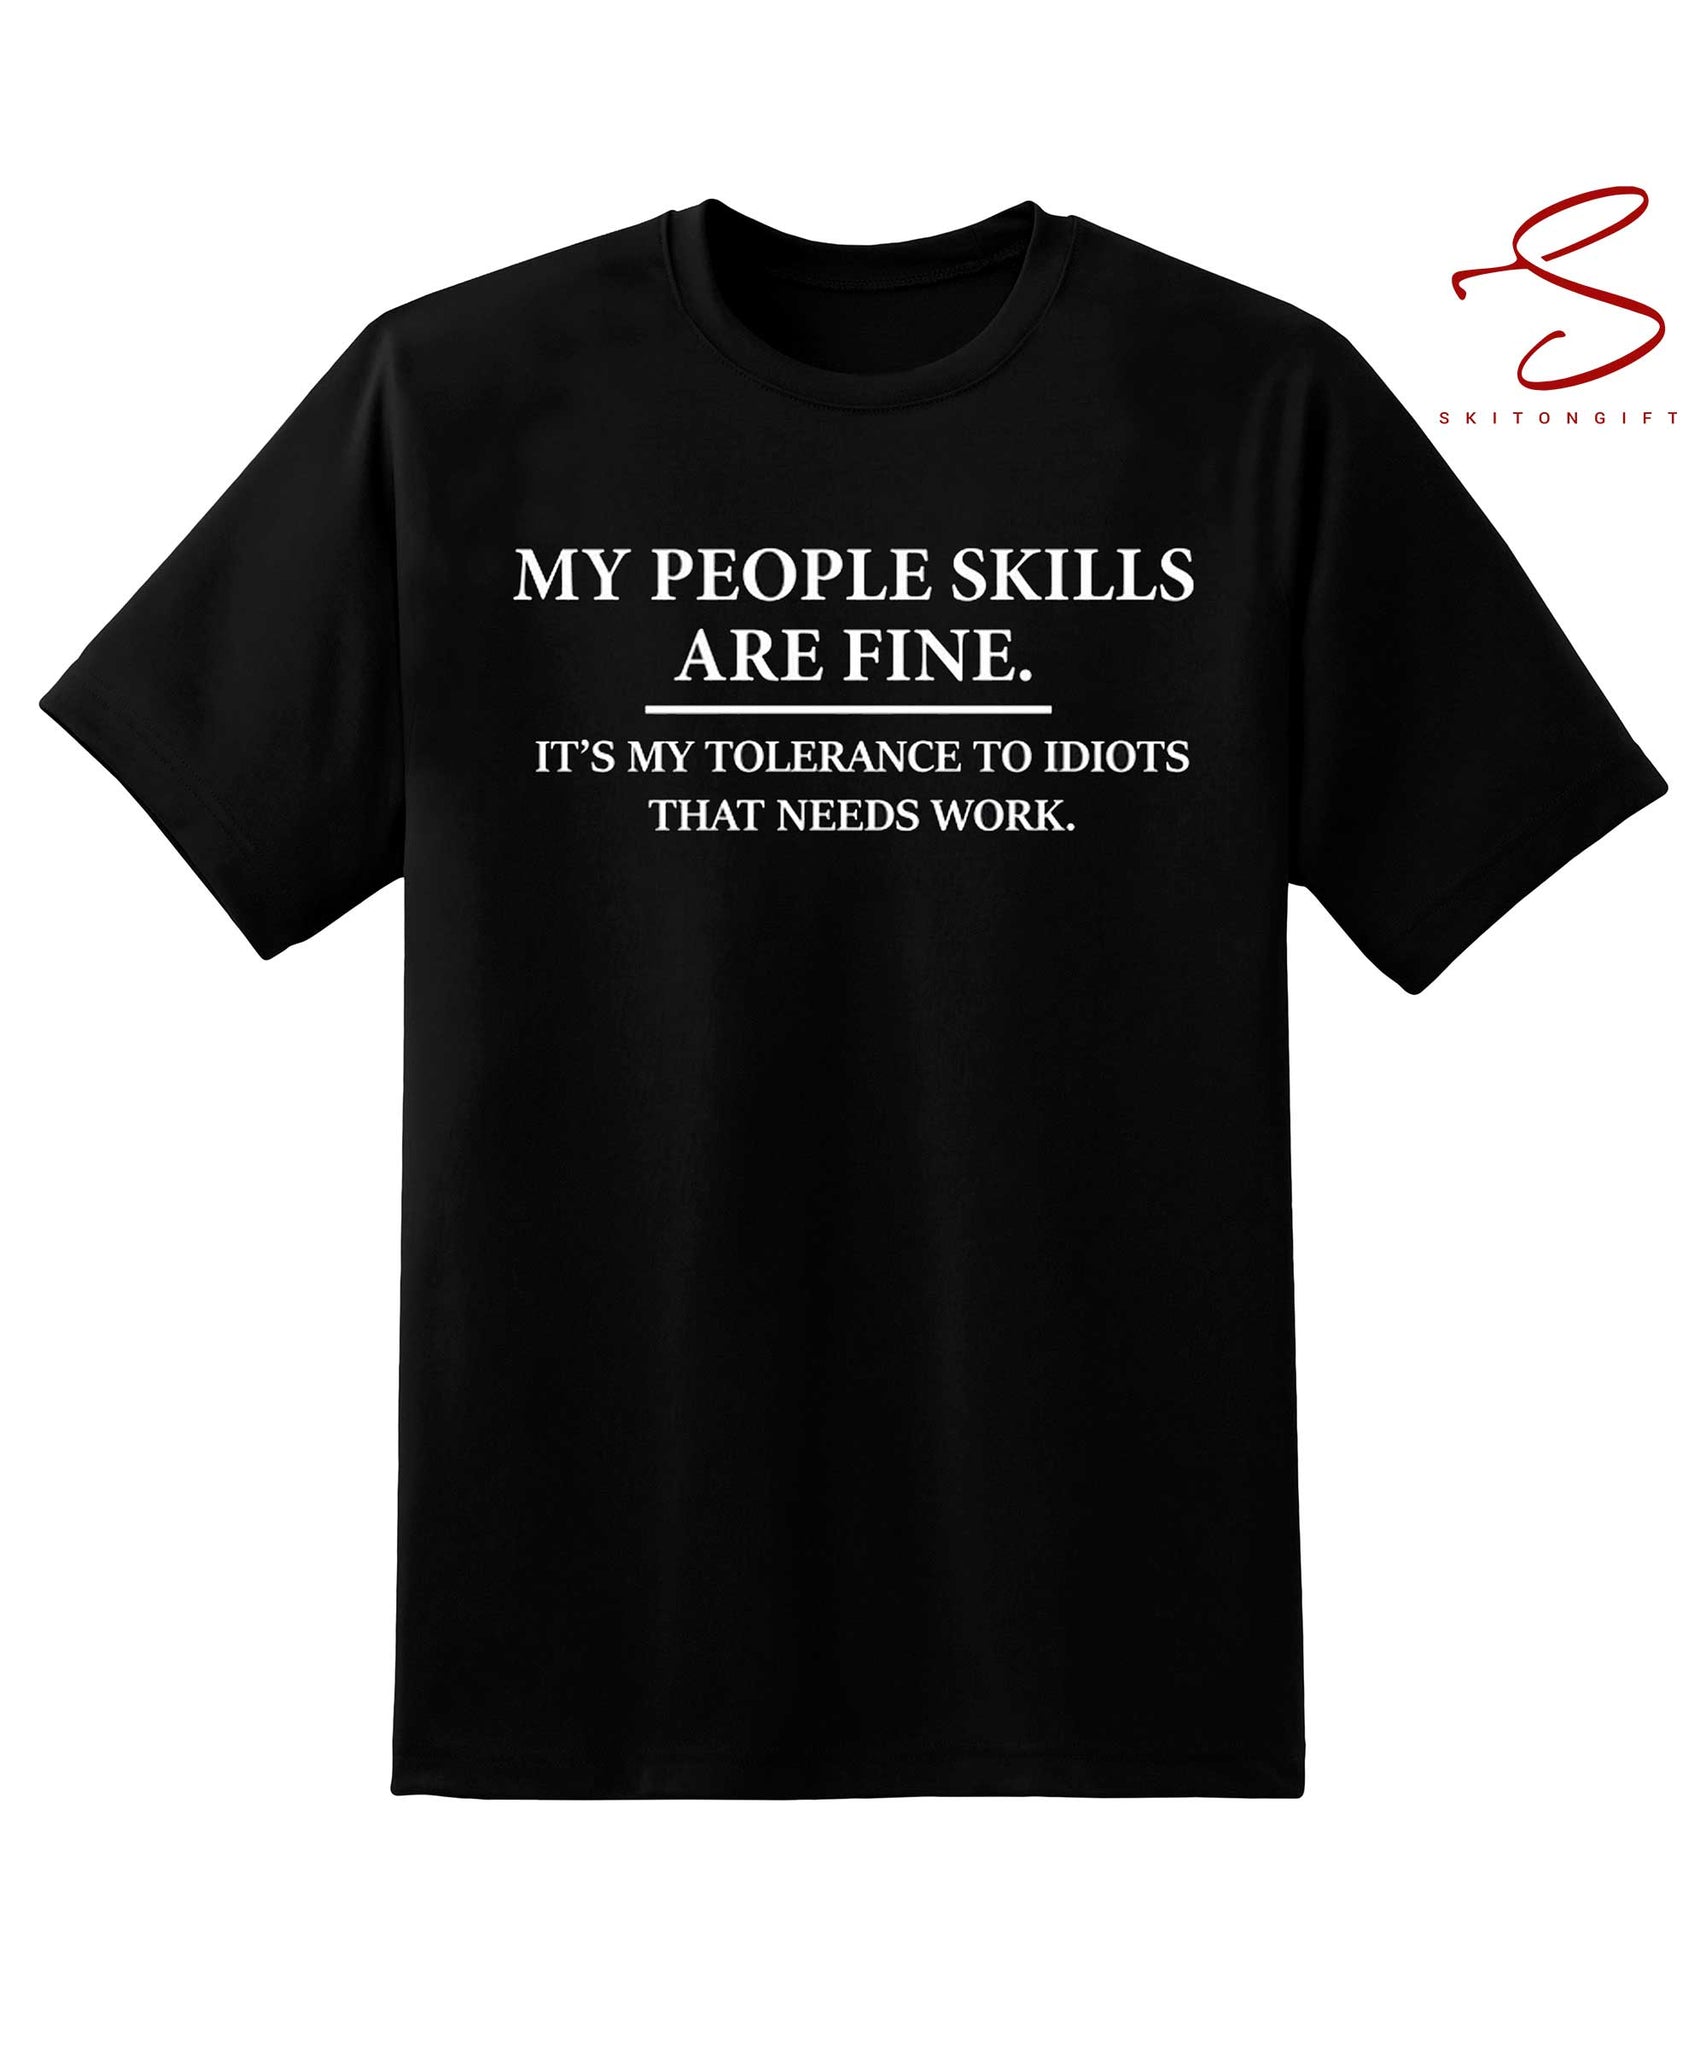 Skitongift My People Skills Are Fine Intolerance To Idiots Funny T Shirt Novelty Gift T Shirt For Men Or Women Unisex Funny Shirts Long Sleeve Tee Hoody Hoodie